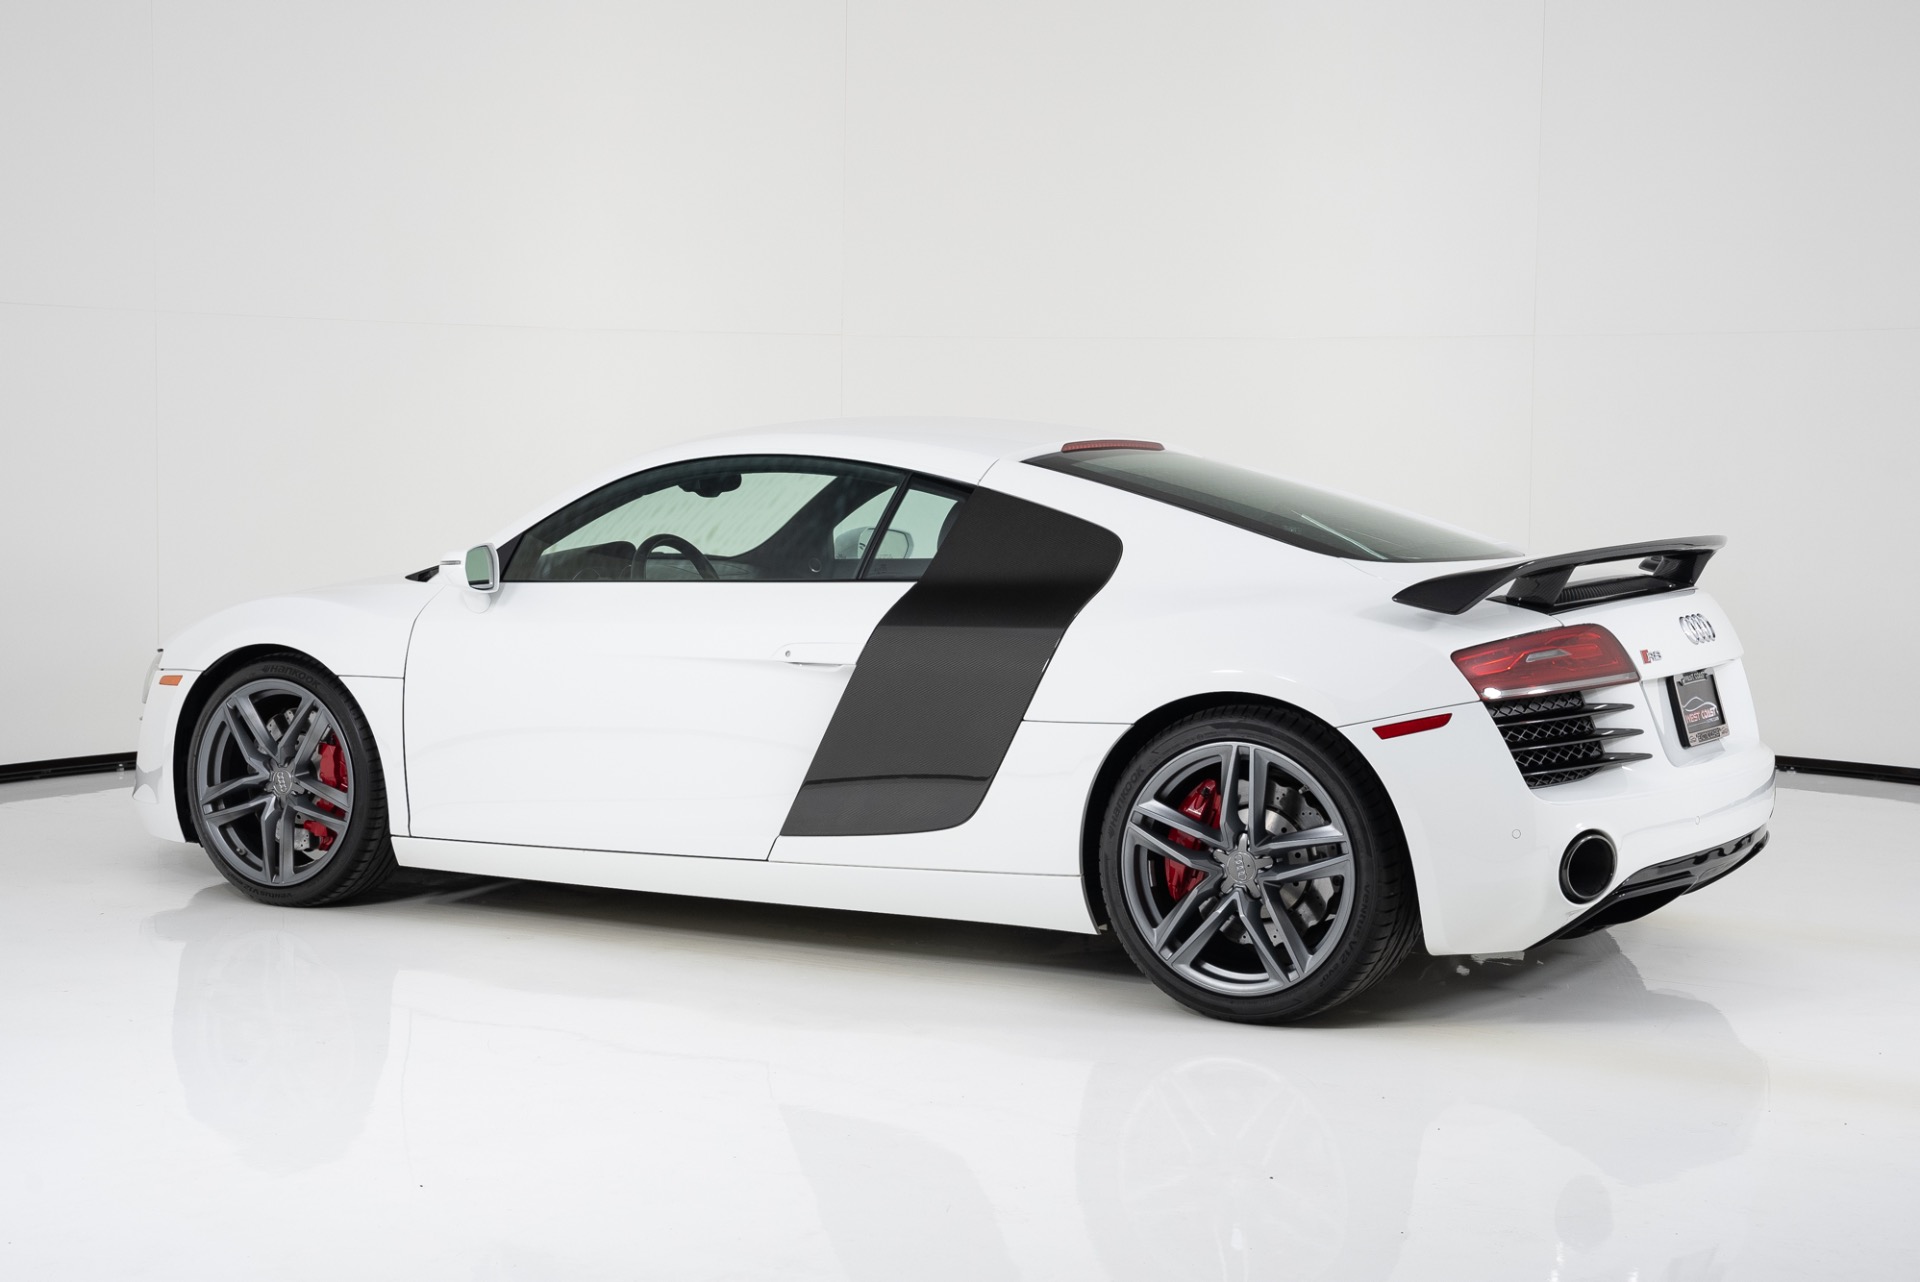 Used 2015 Audi R8 4.2 For Sale (Sold)